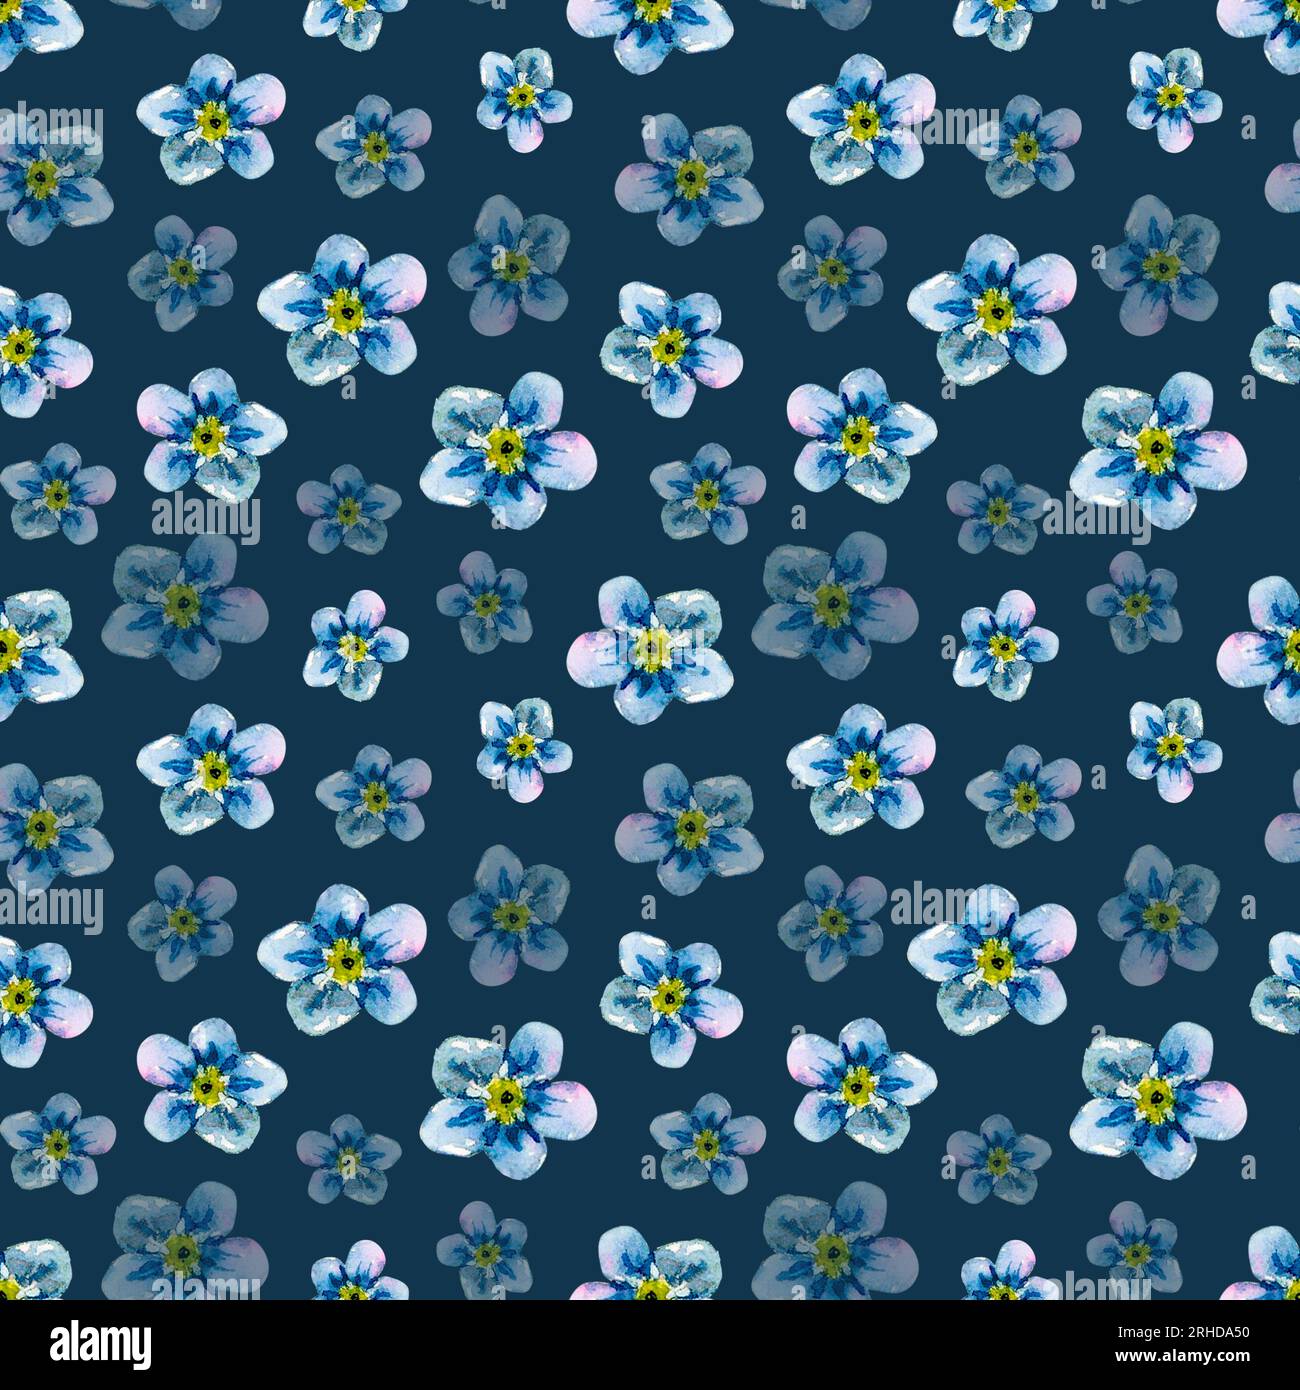 Sizing - Forget-me-not Patterns